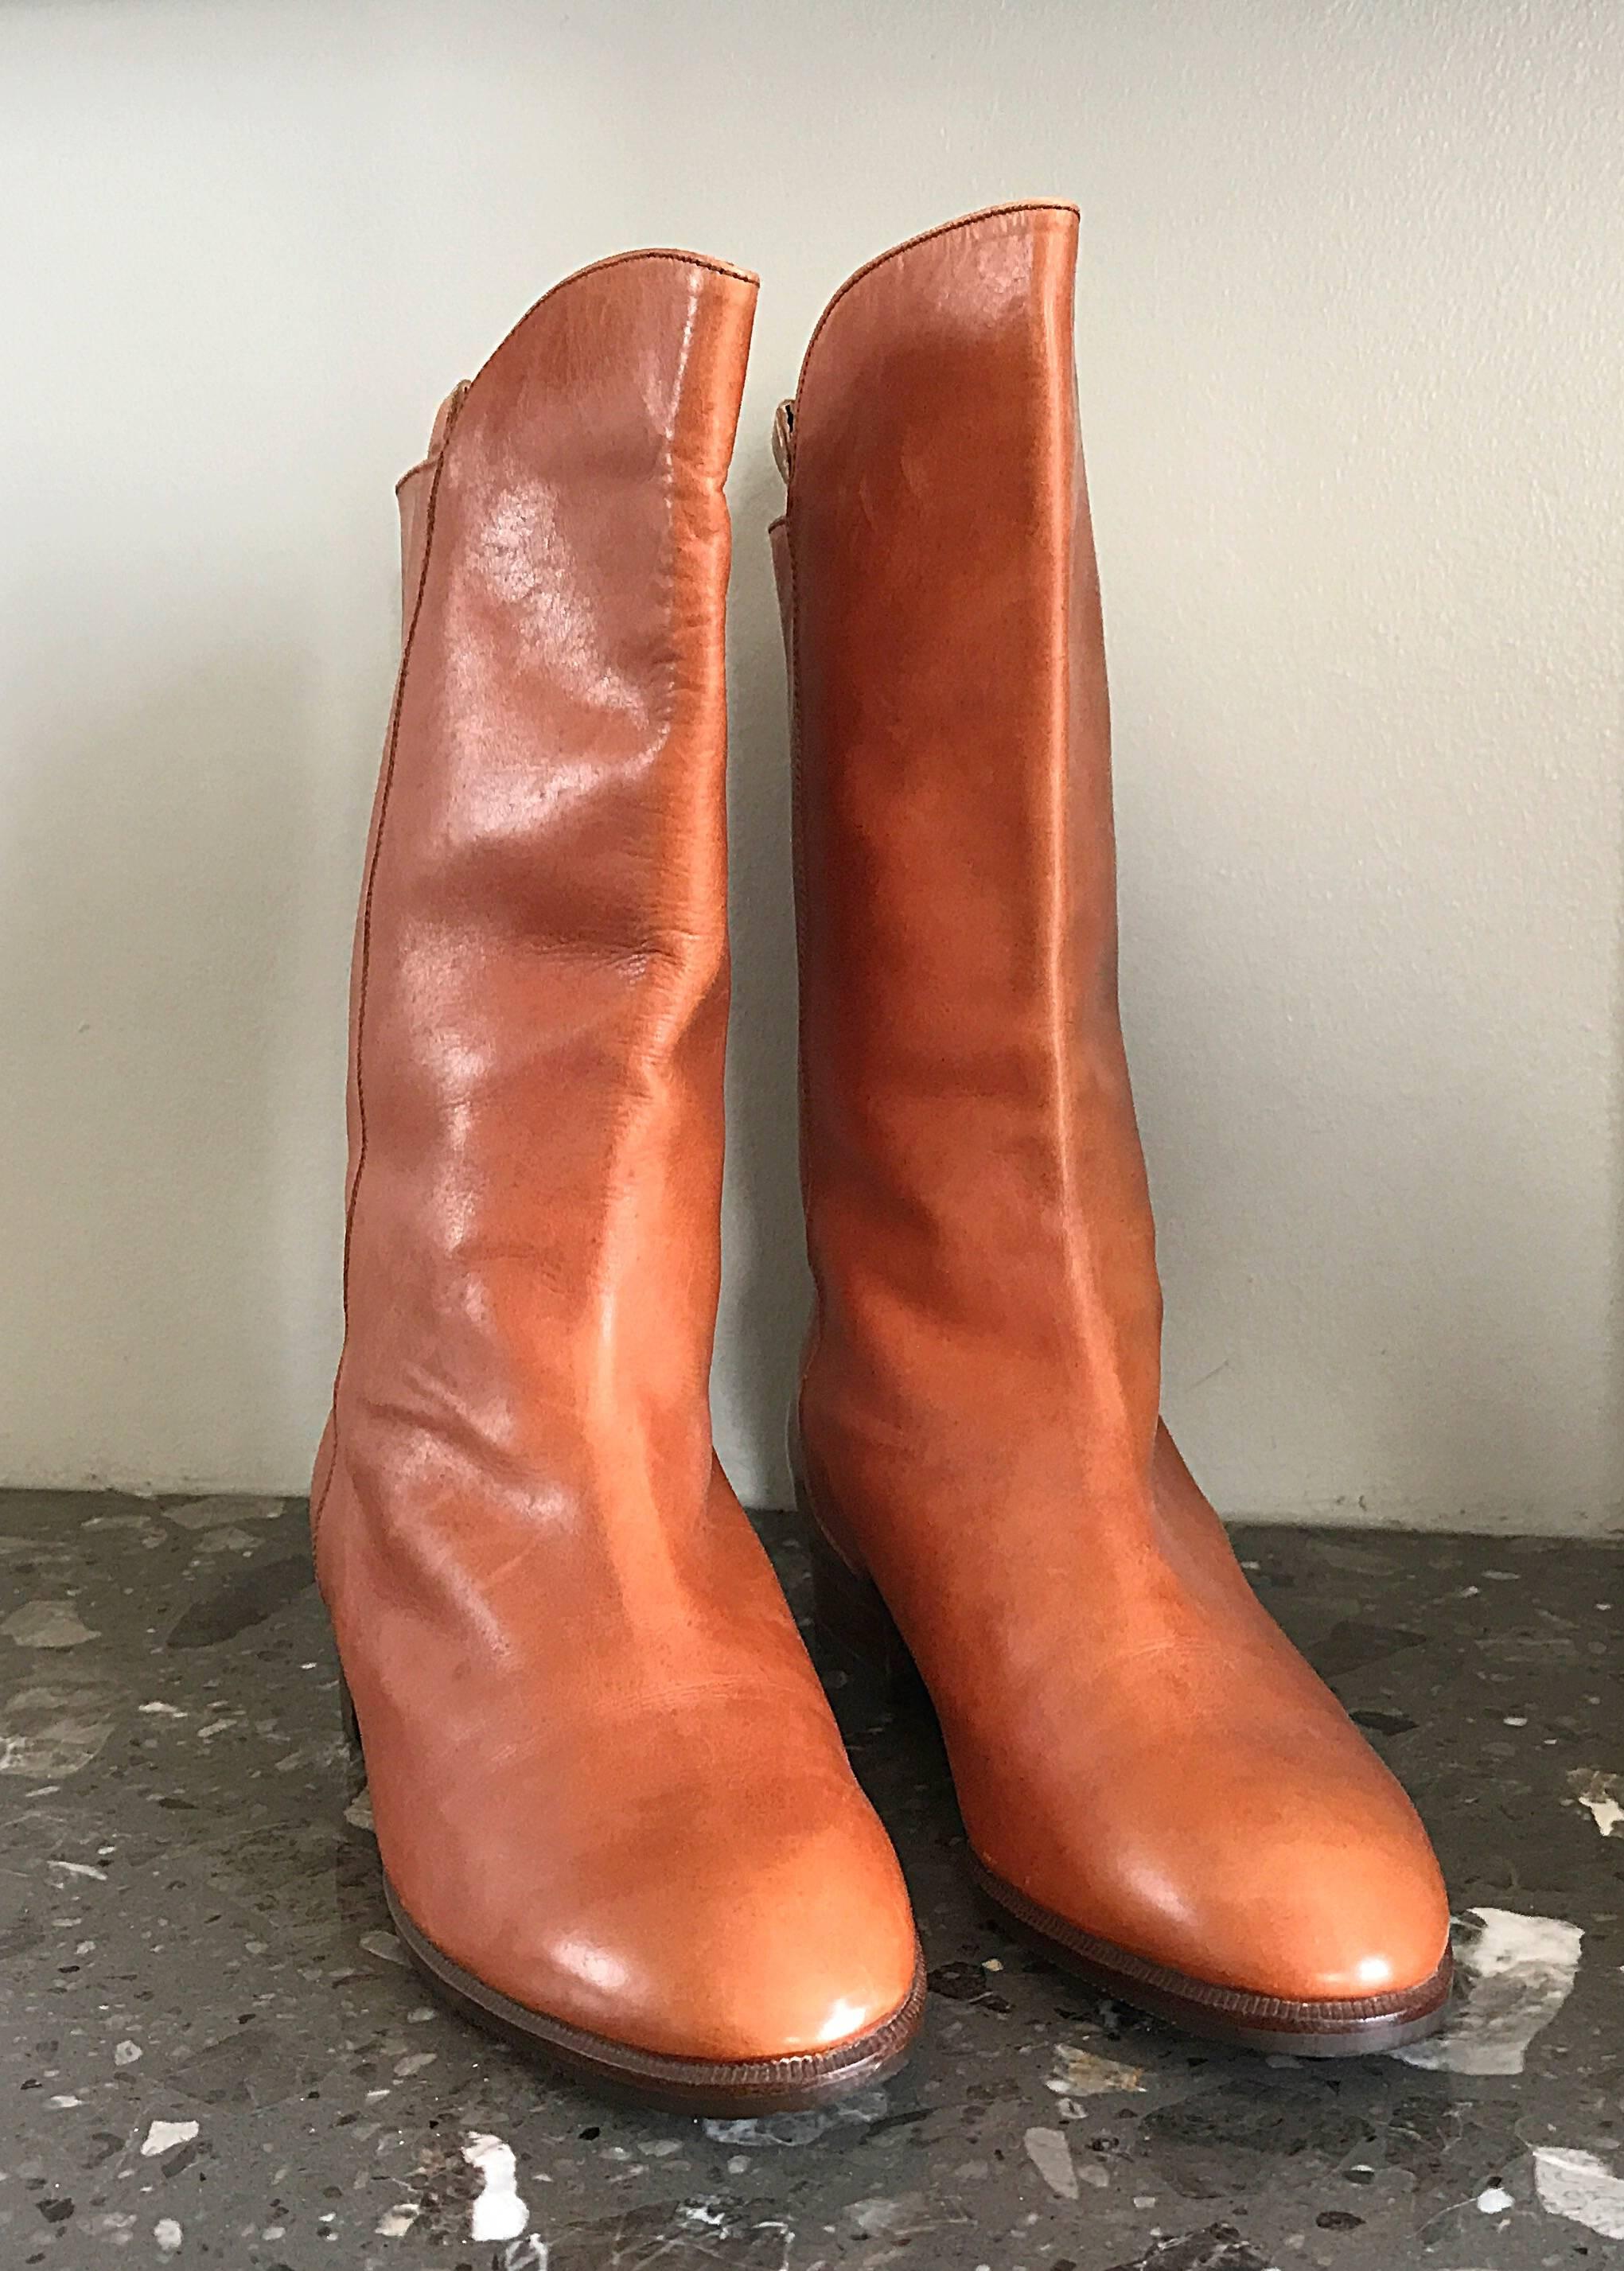 New 1980 Perry Ellis Size 6 Tan Saddle Leather Deadstock Calf Booties Boots en vente 2